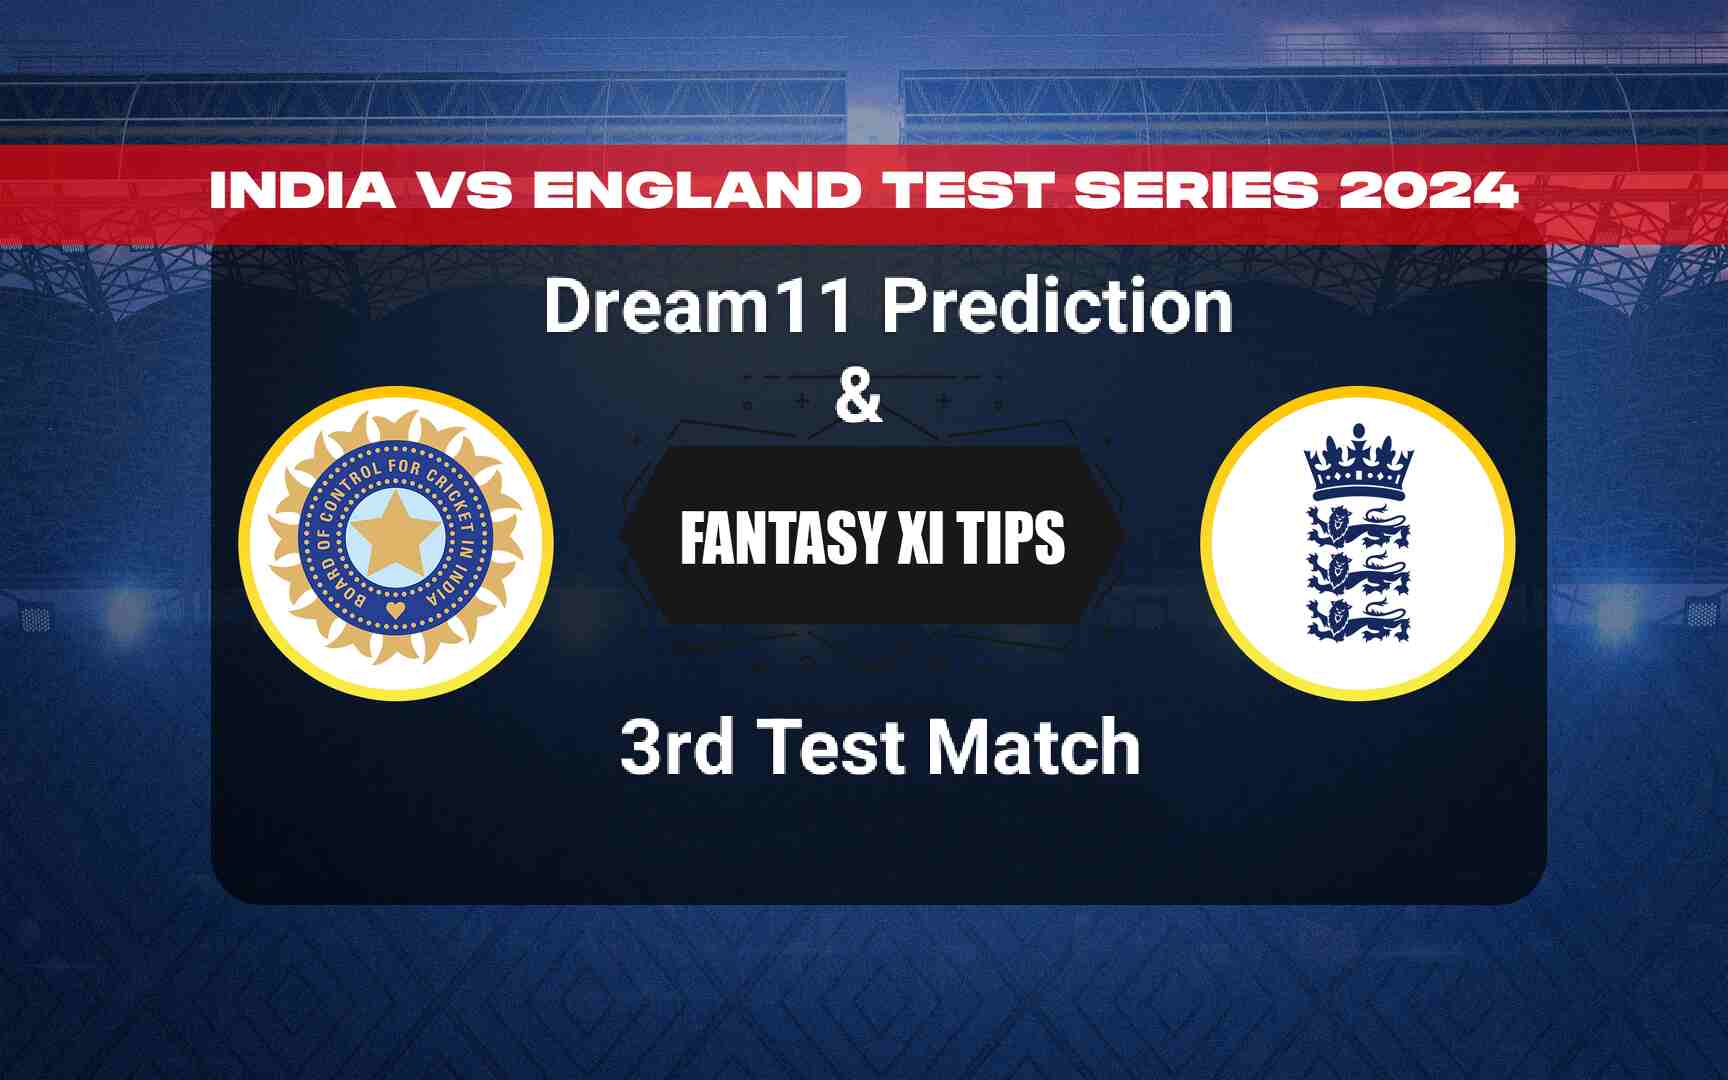 IND vs ENG 3rd Test Dream11 Prediction, Player Stats, Head to Head, Pitch Report, Captain & Vice-captain, Live Streaming Details and More